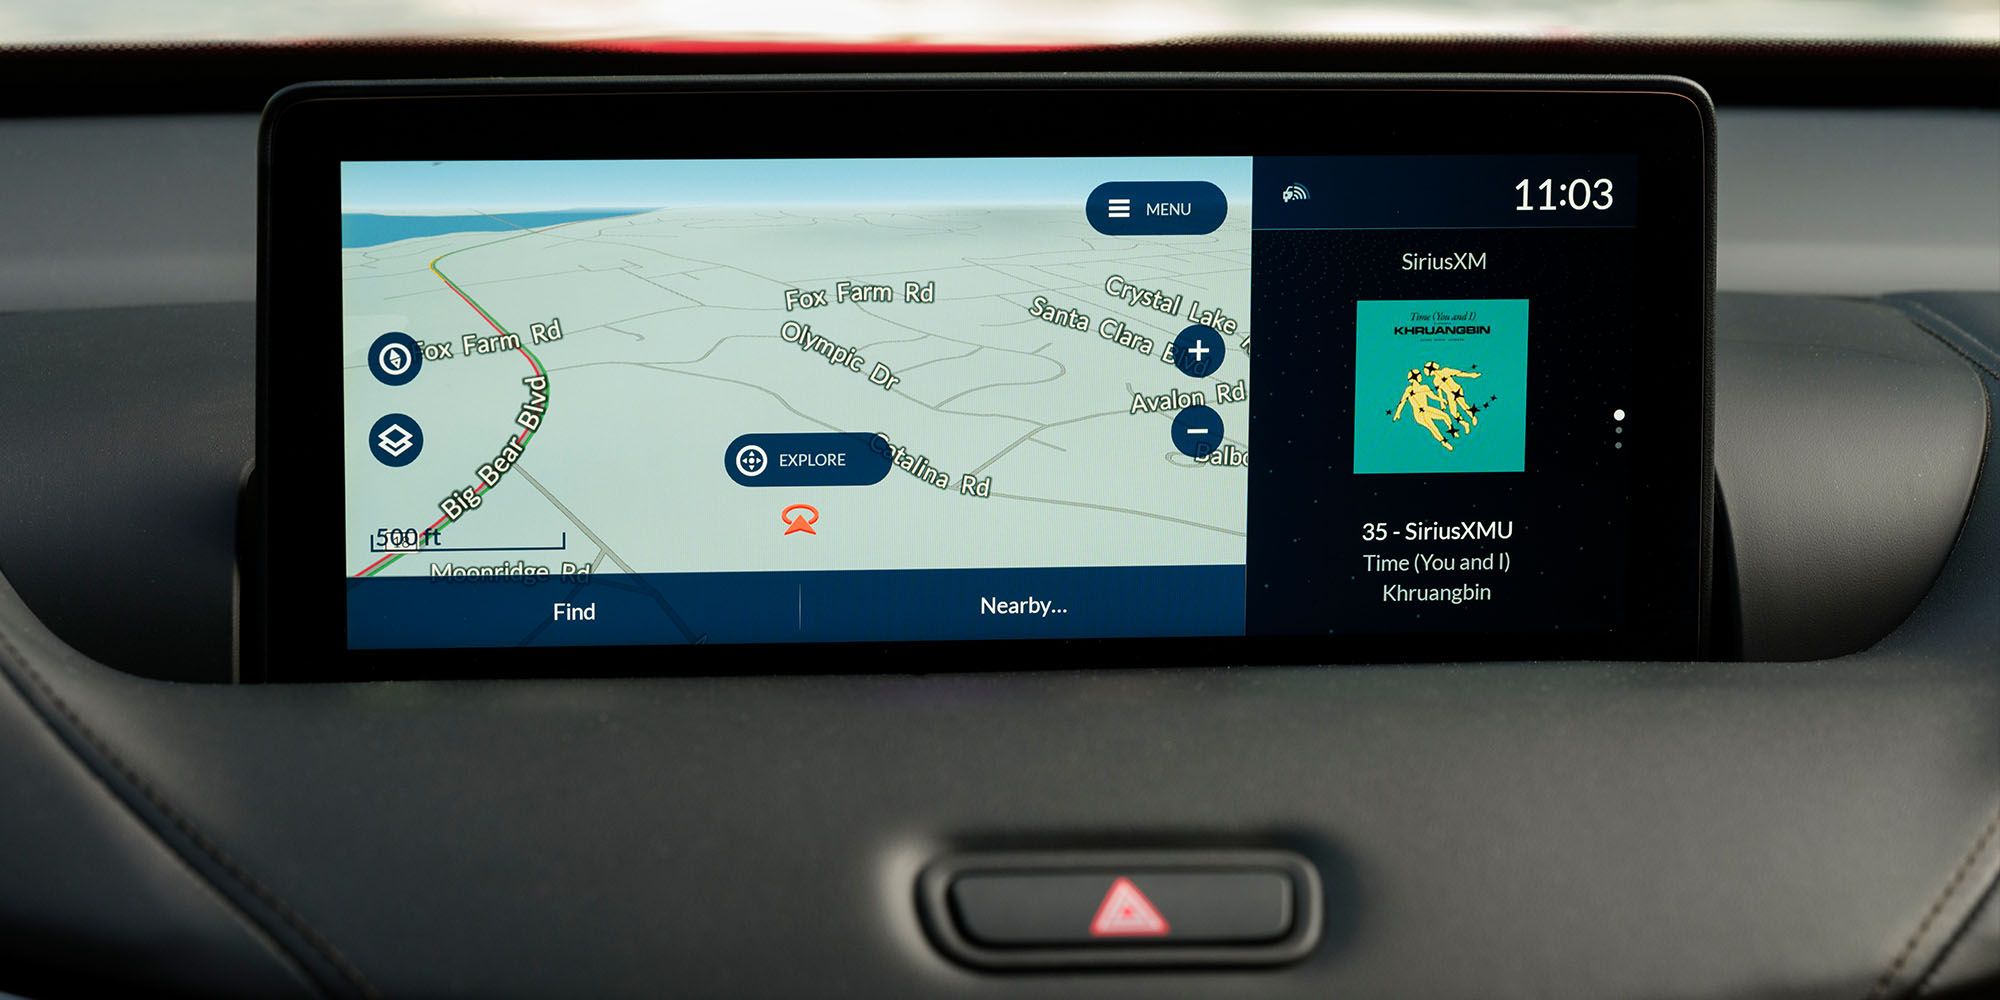 The infotainment system in the TLX, showing the navigation